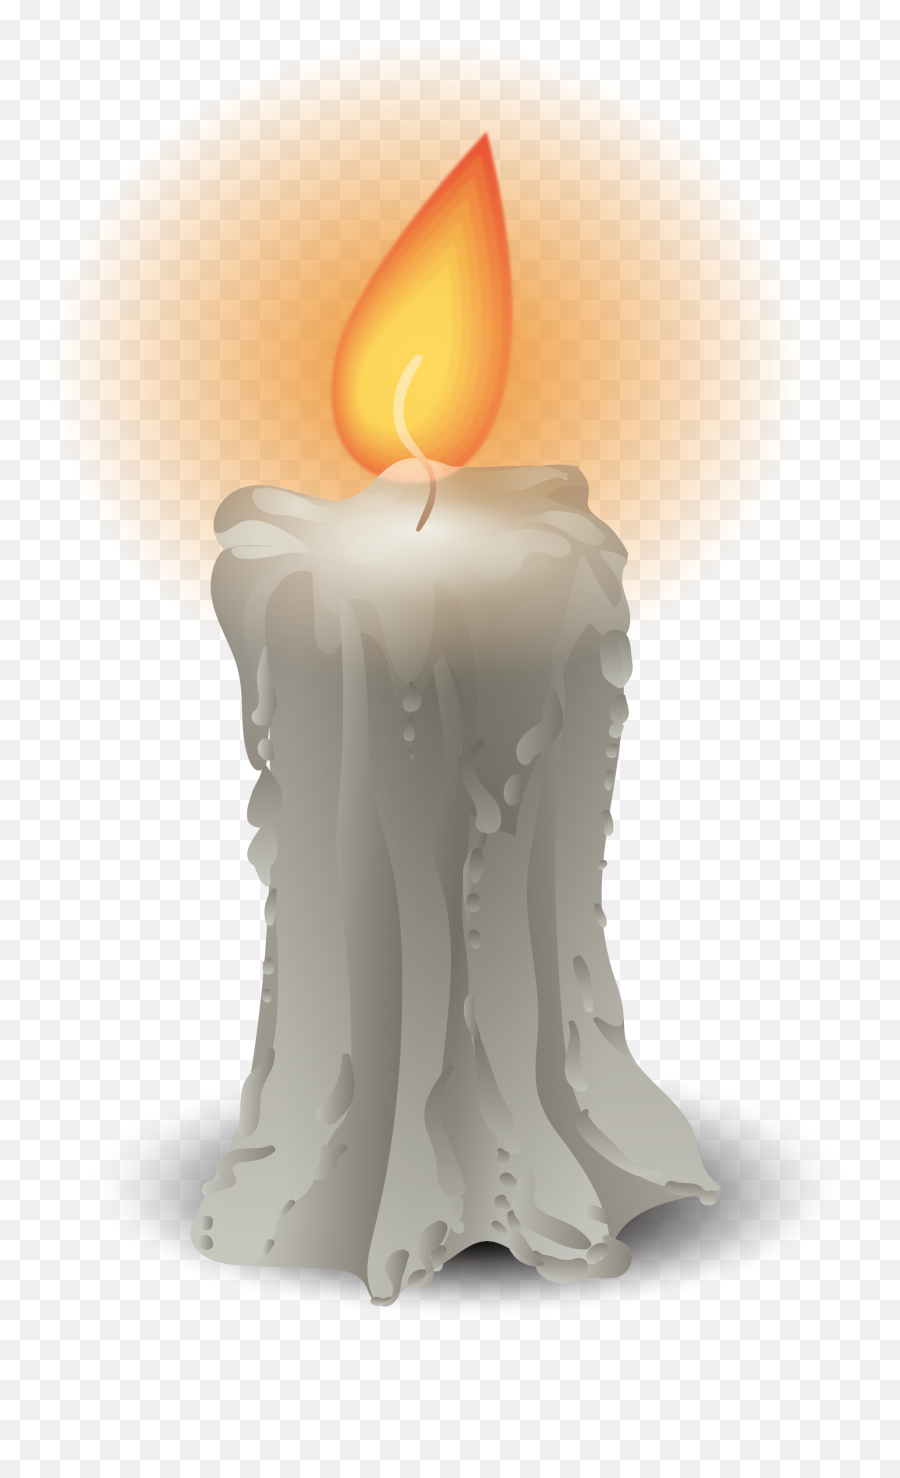 Candle Combustion Wax - Transparent Background Candle Clip Art Png,Candles Png